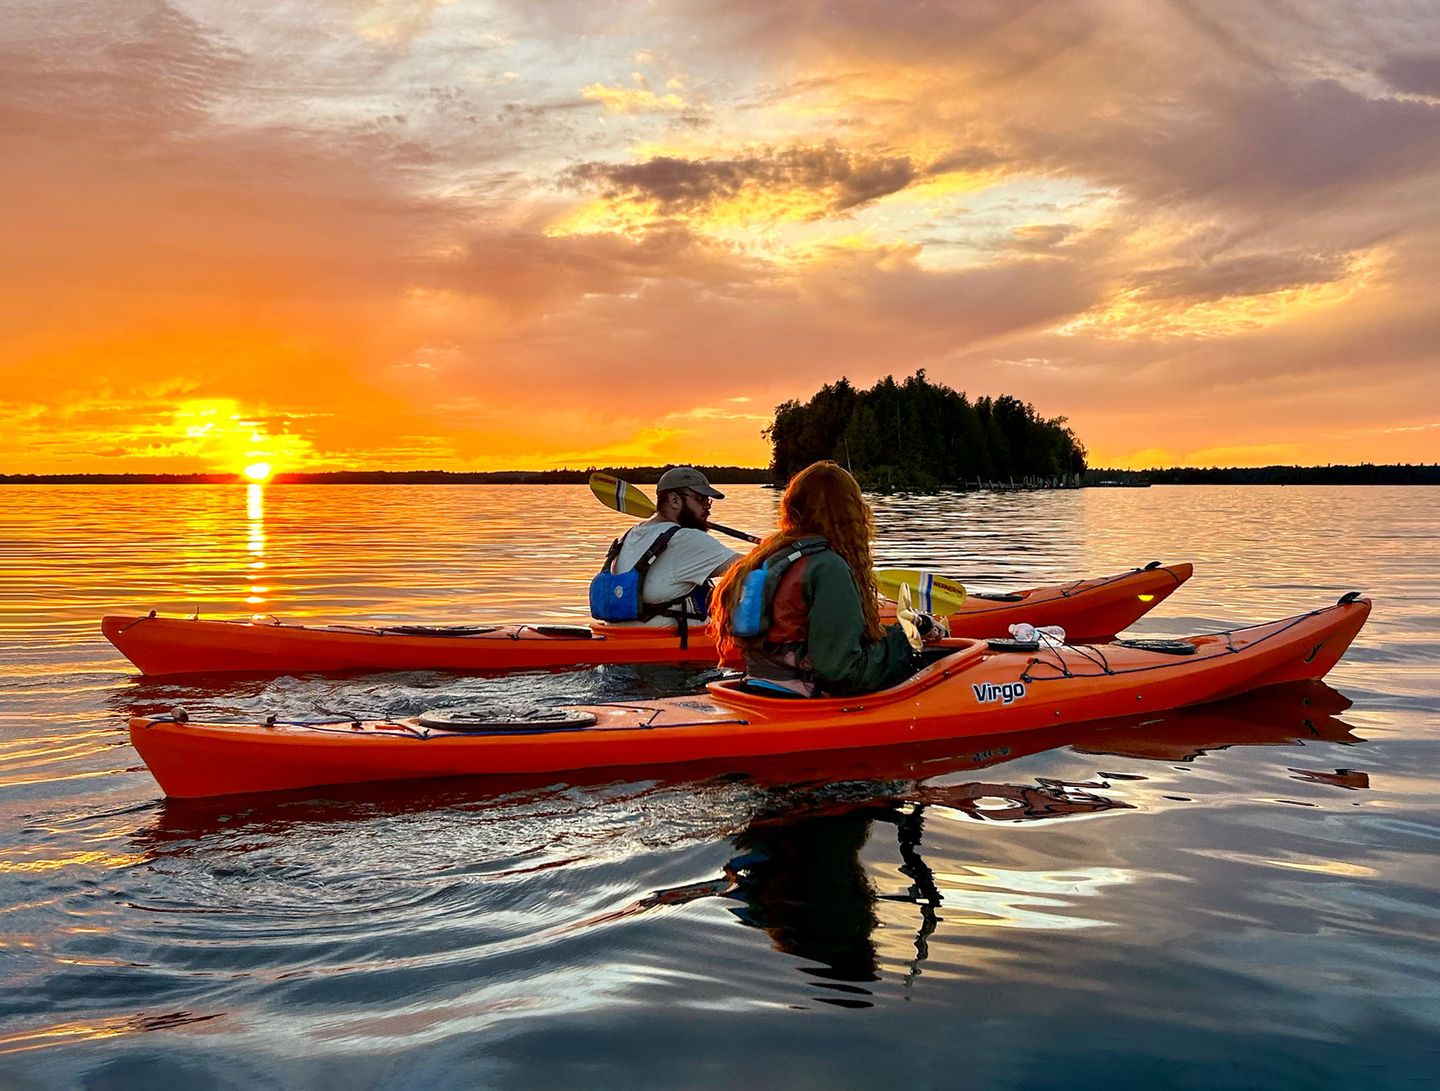 A man and a woman, each in a solo sea kayak, paddle on calm the waters of Lake Huron in the Les Cheneaux Islands with a beautiful sunset and clouds beyond them.